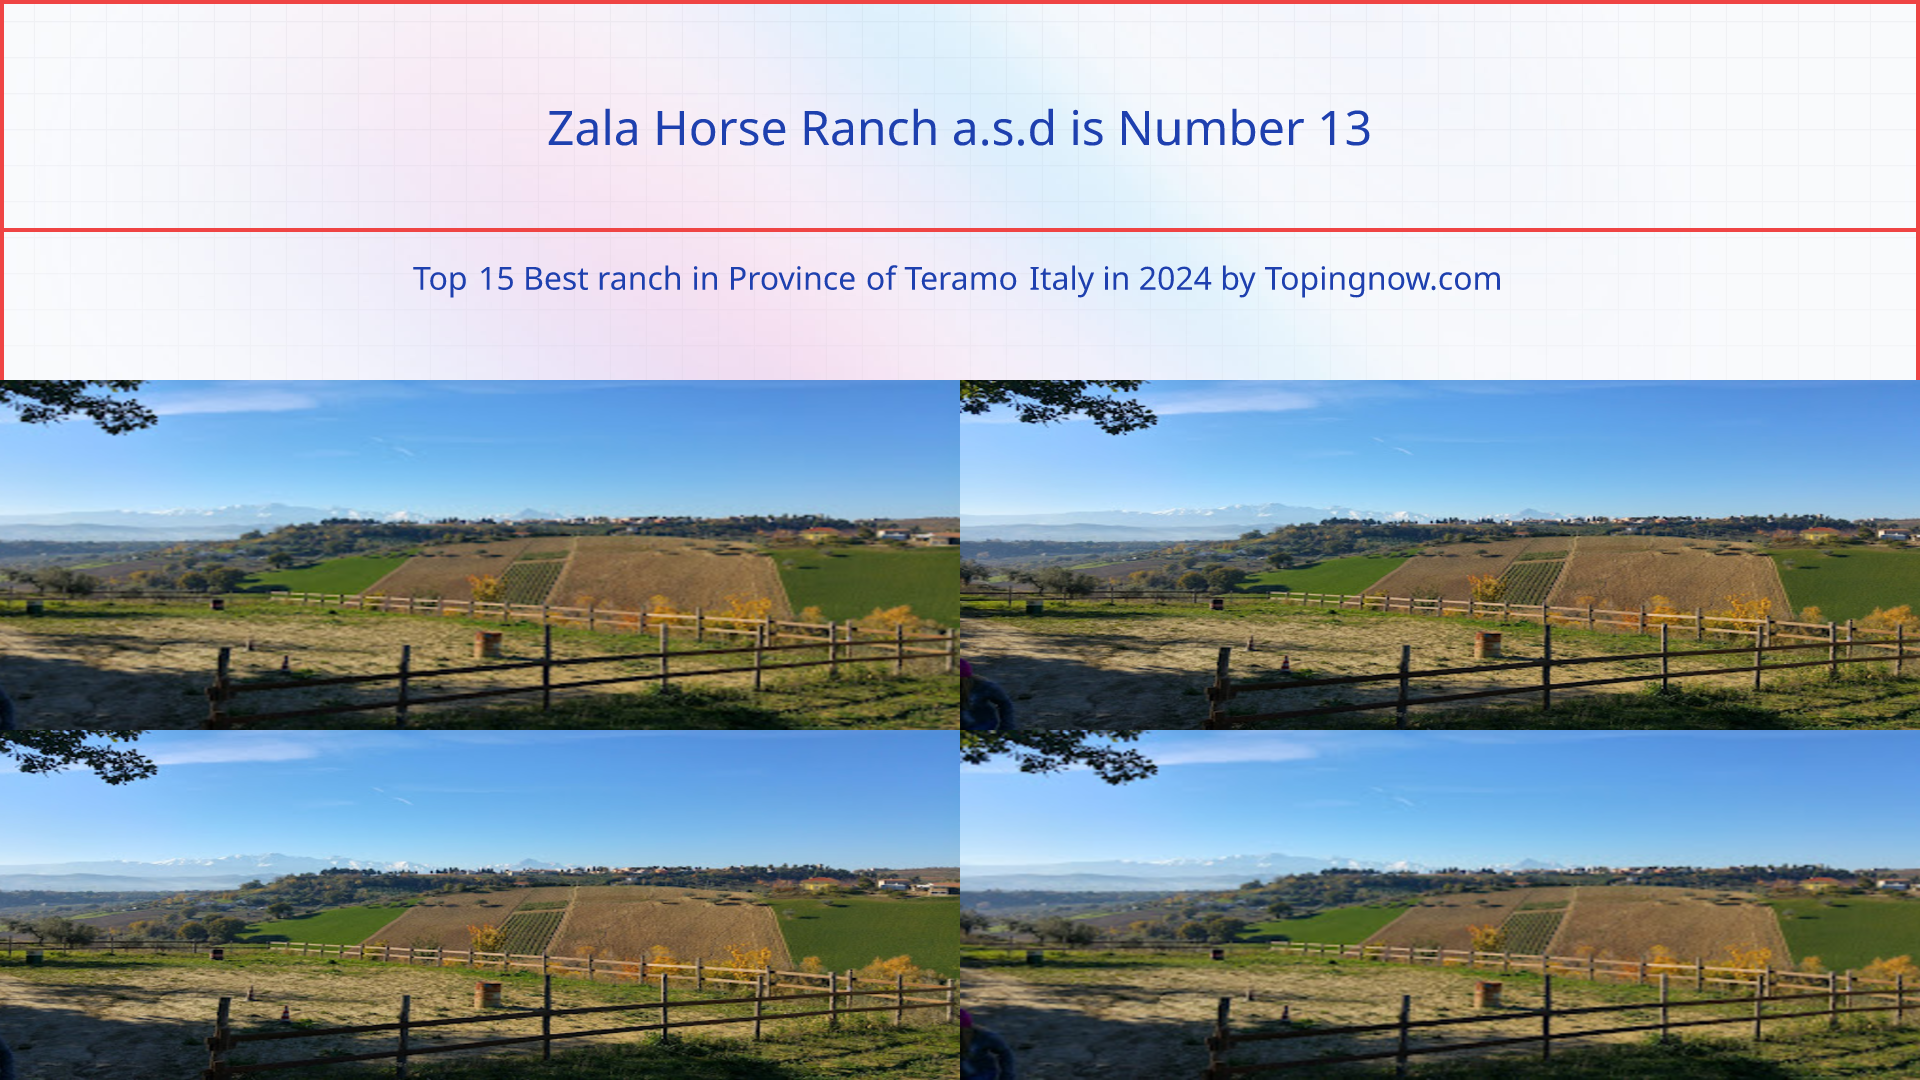 Zala Horse Ranch a.s.d: Top 15 Best ranch in Province of Teramo Italy in 2024